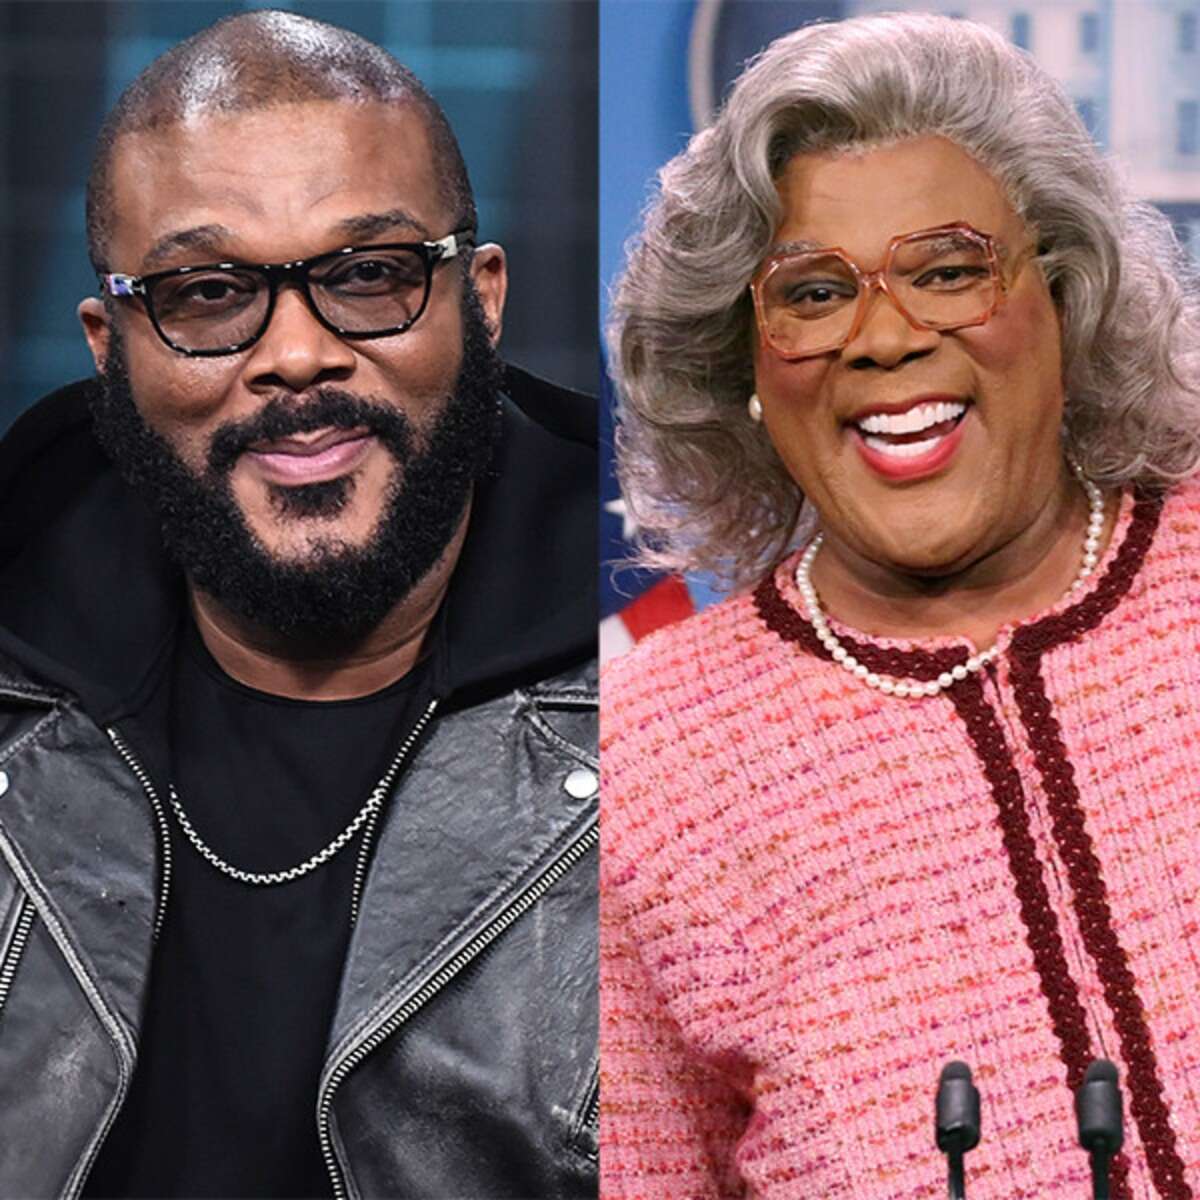 Tyler Perry and Madea character